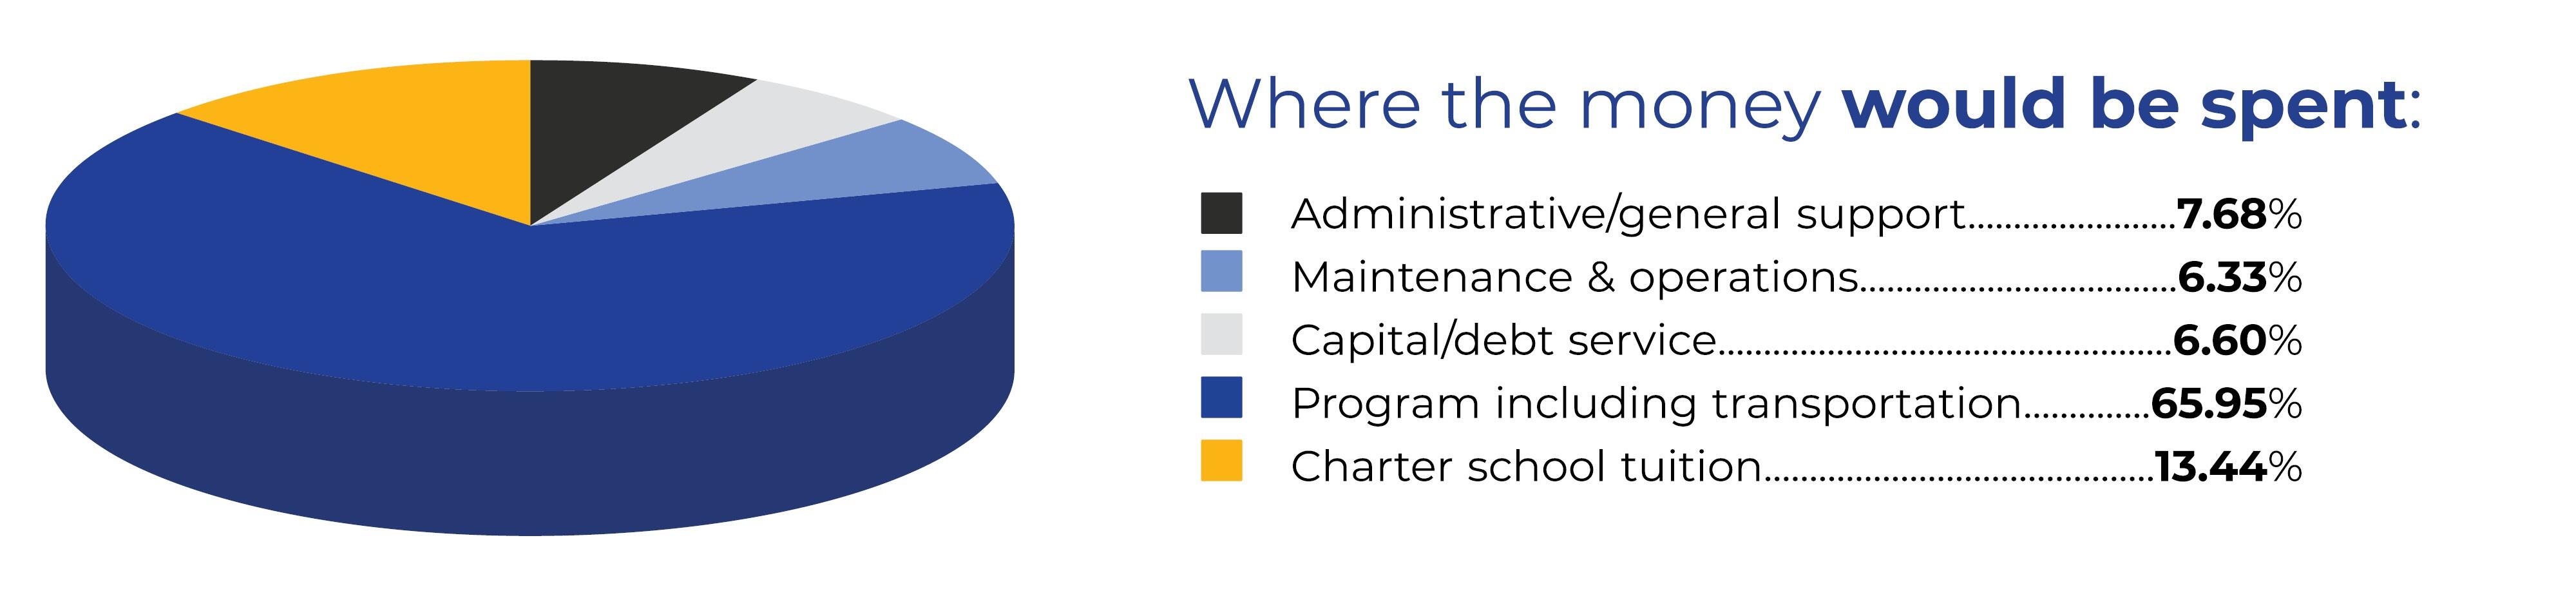 Pie chart of expenditures with the following breakdown: Administrative/general support 7.68%; Maintenance & operations 6.33%; Capital/debt service 6.60%; Program including transportation 65.95%; Charter school tuition 13.44%